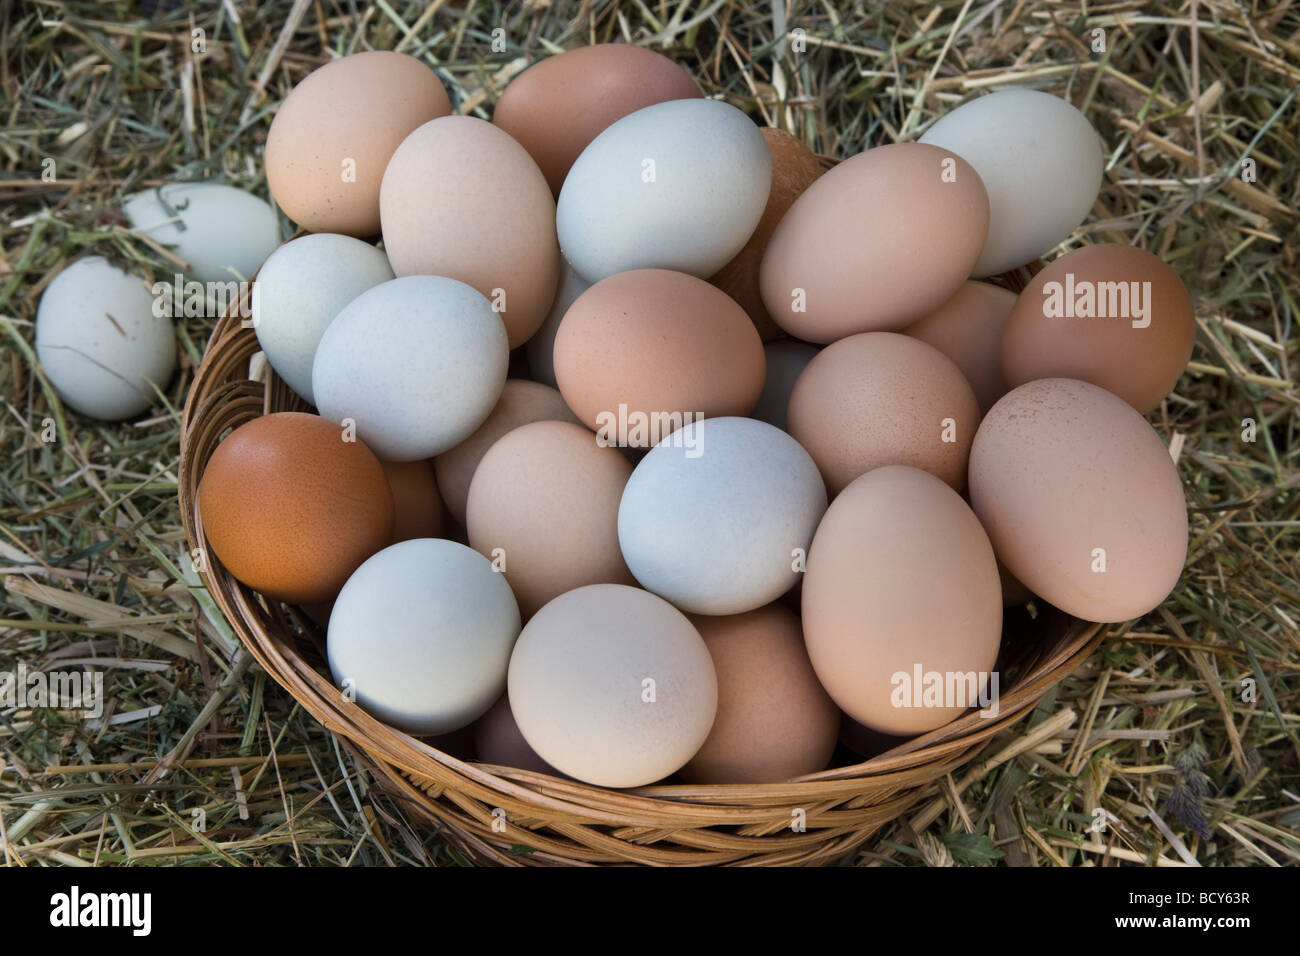 Chicken eggs in basket, natural colors. Stock Photo